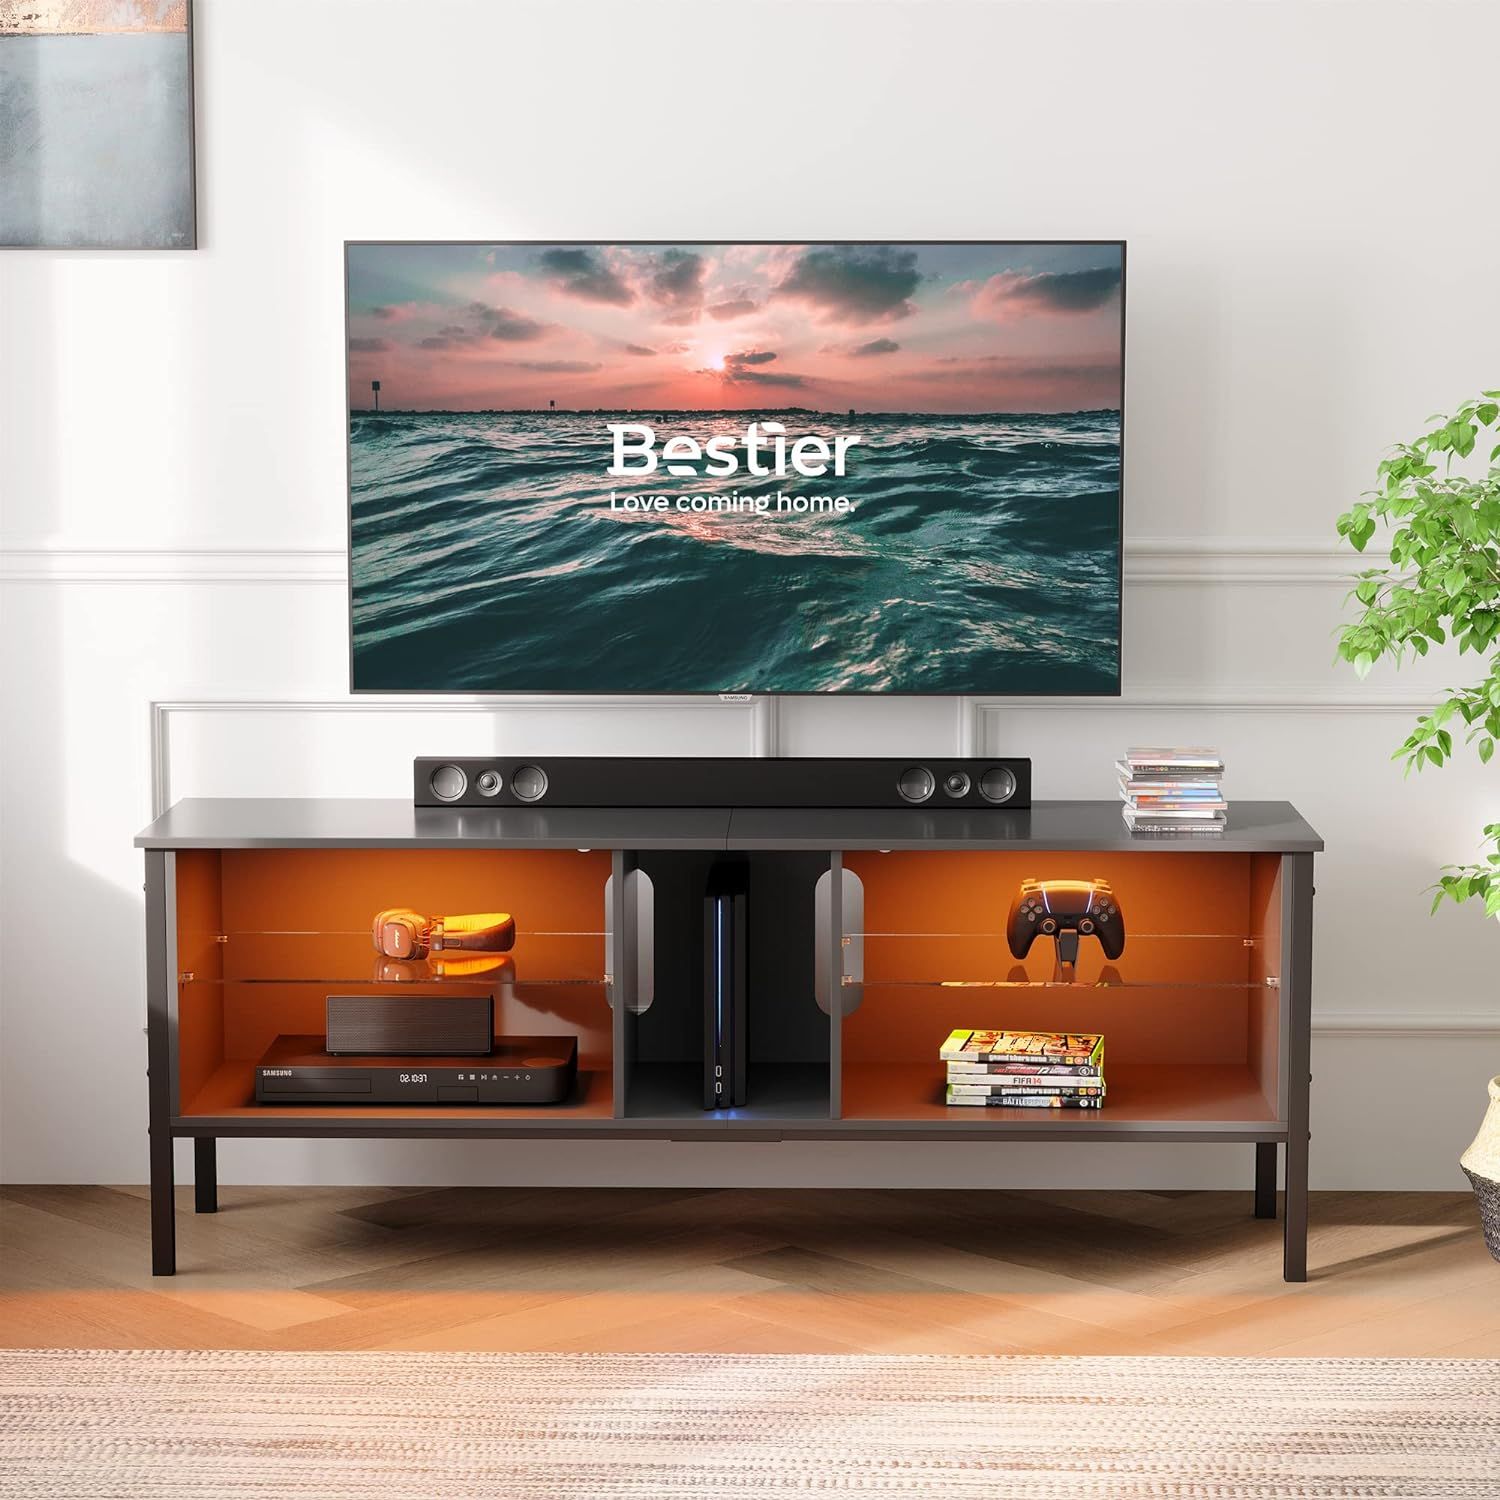 Bestier Tv Stand For 70 Inch Tv, Large Gaming Nepal | Ubuy Regarding Bestier Tv Stand For Tvs Up To 75&quot; (View 11 of 15)